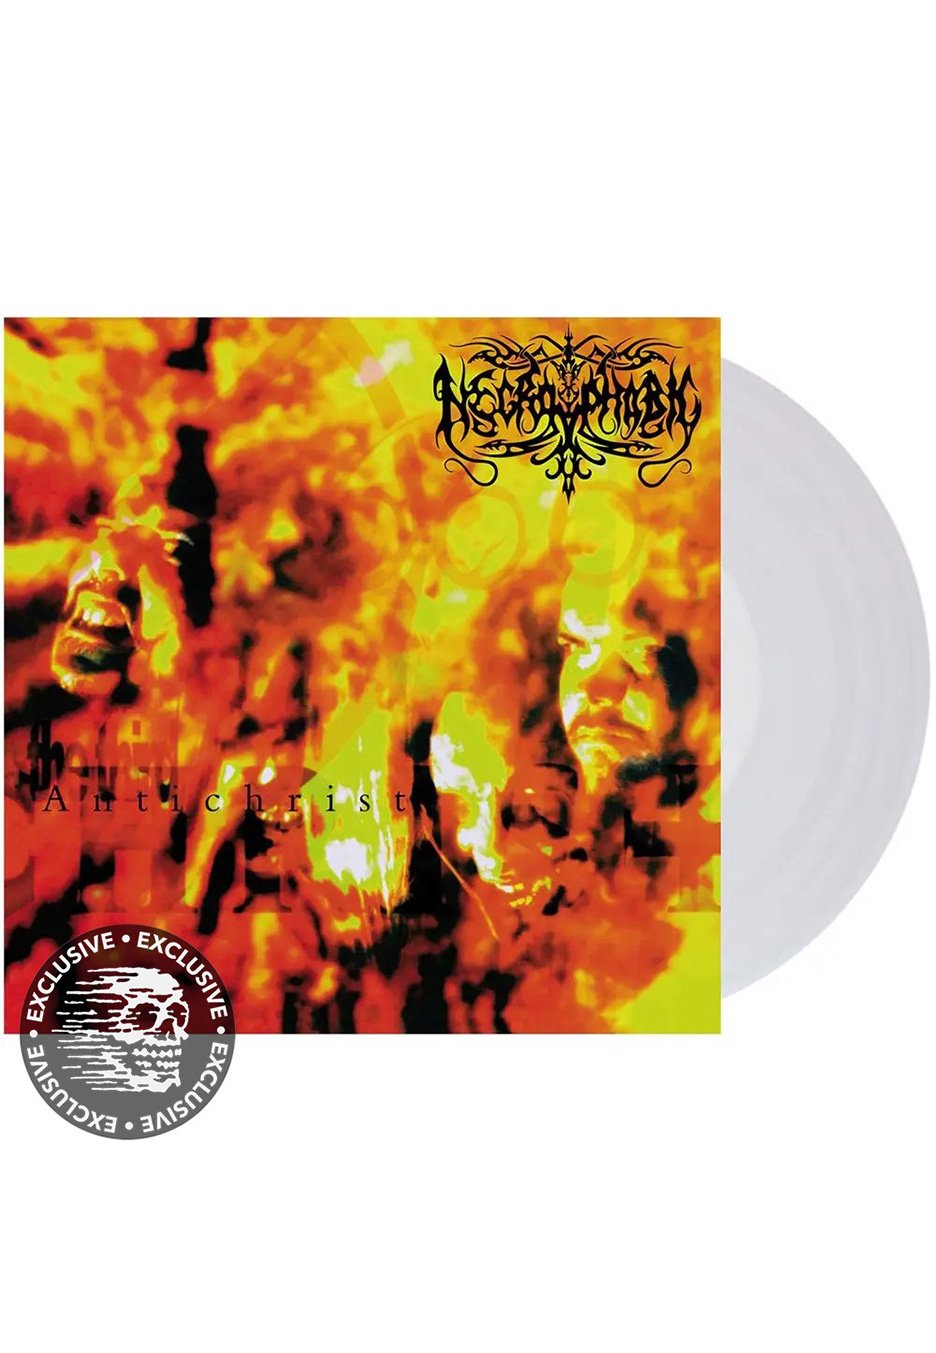 Necrophobic - The Third Antichrist (Re-Issue 2022) Clear - Colored Vinyl